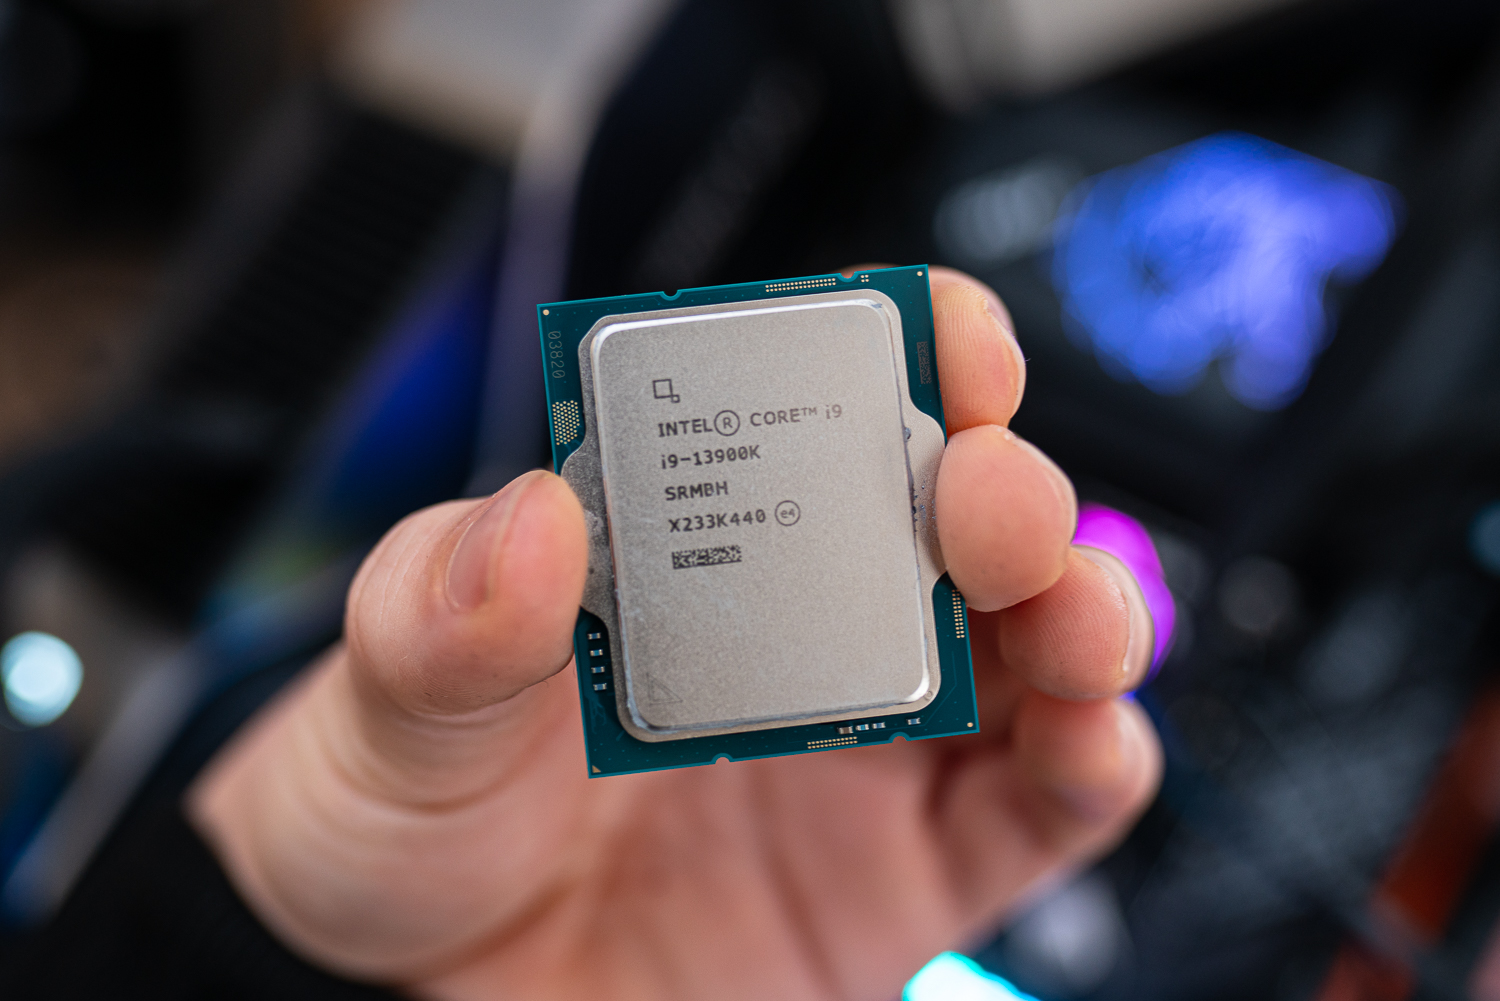 Intel finally brings APO game optimization to 12th and 13th Gen processors  after consumer outrage